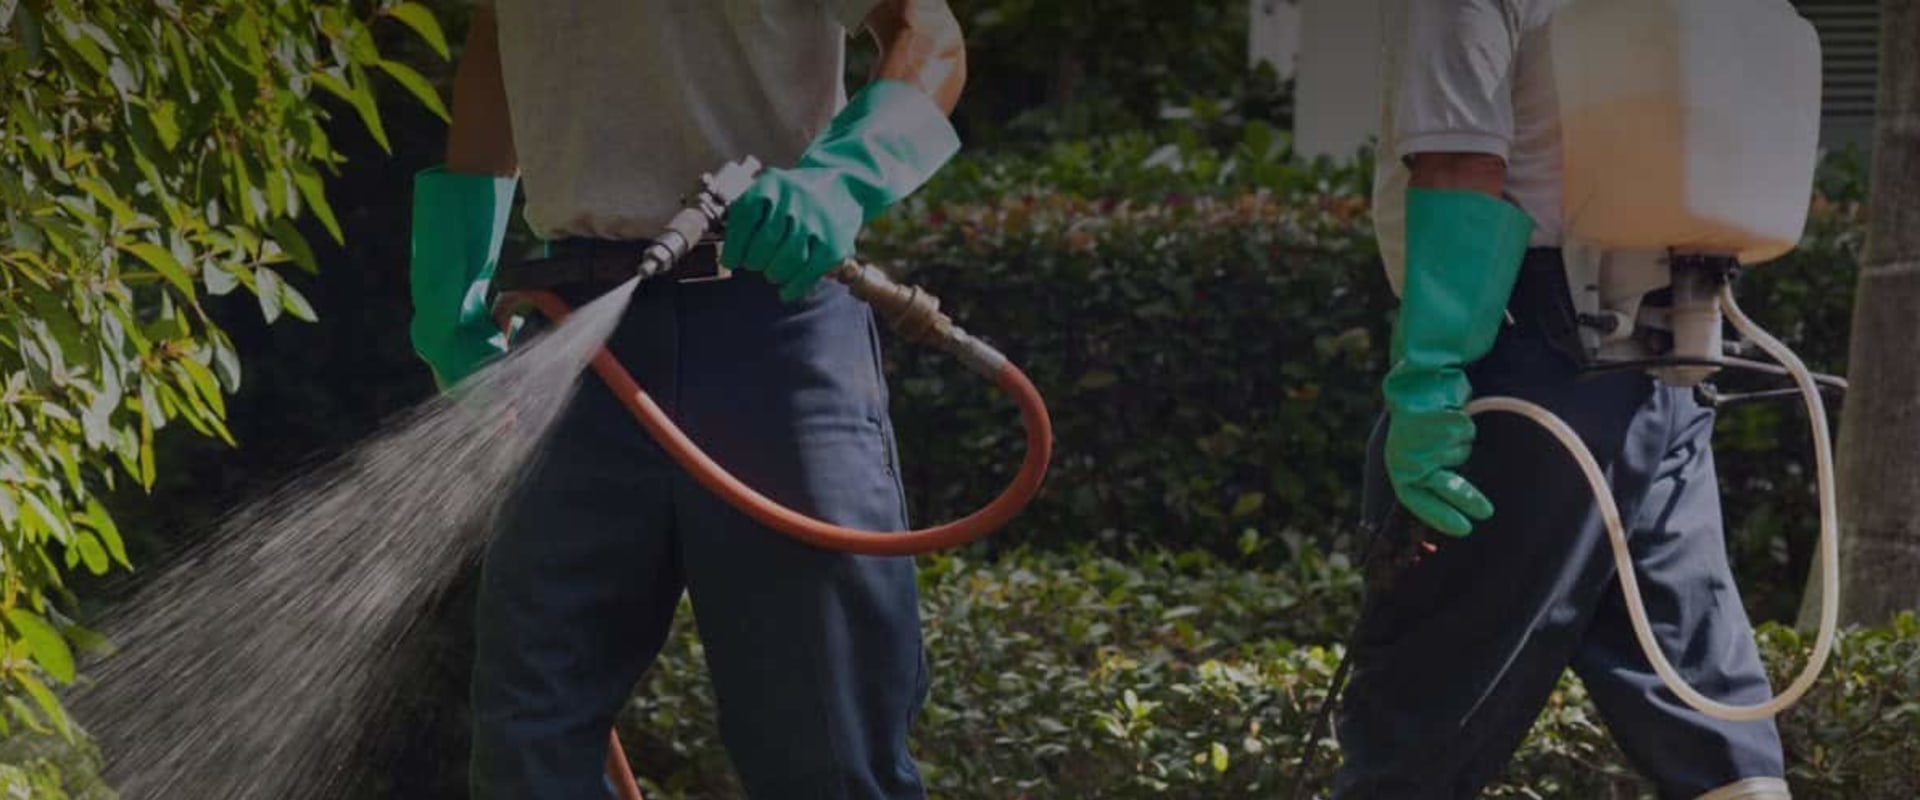 How To Choose The Right Pest Control Service Company For Lawn Pest Control In Woodstock, GA